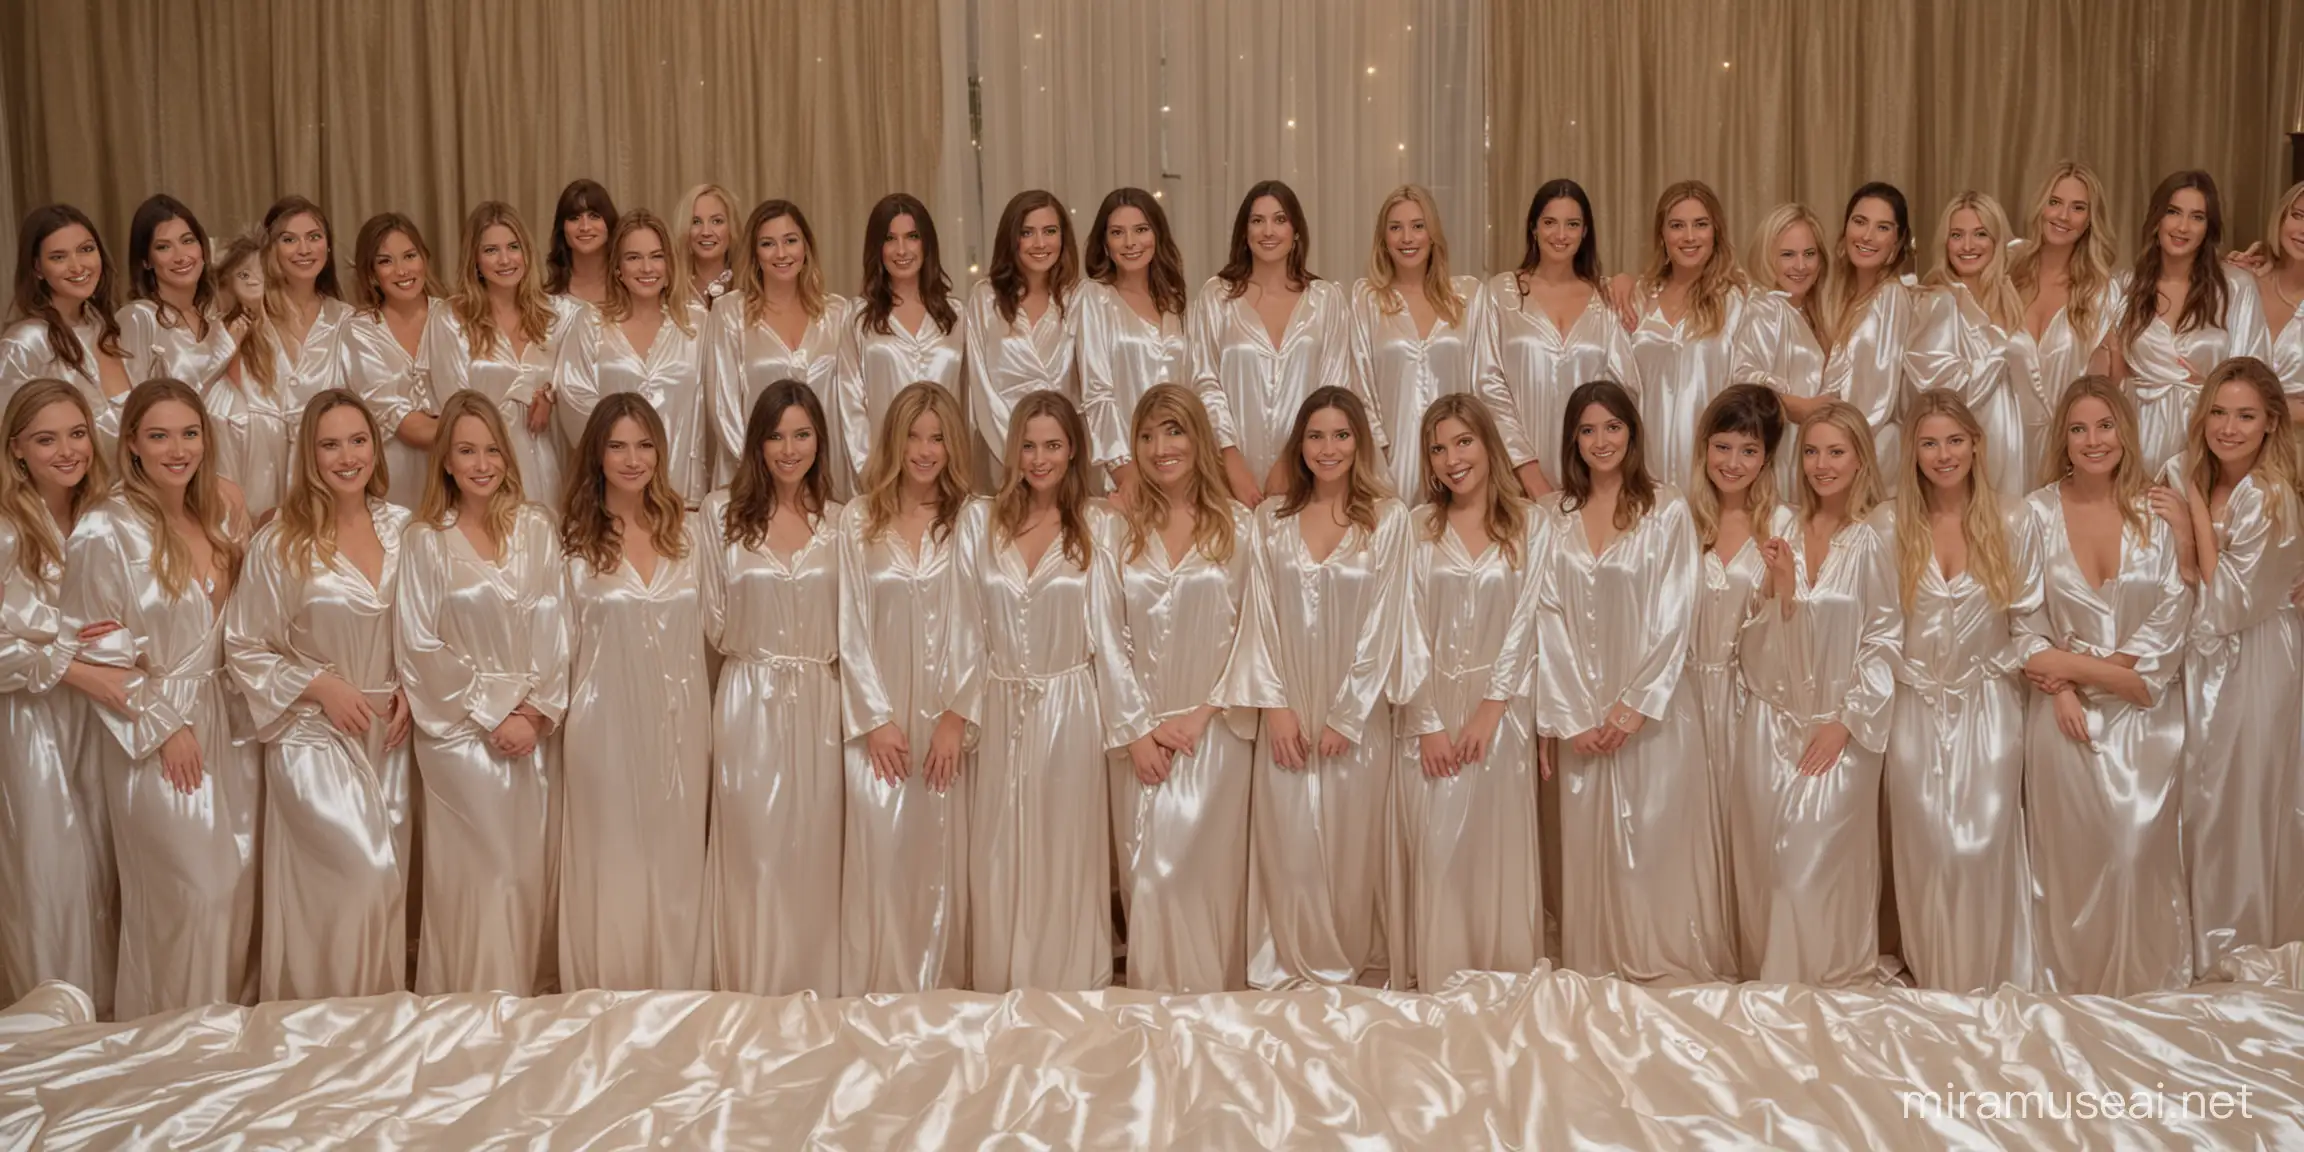 Gathering of Women in Milky Satin Nightgowns on Giant Bed